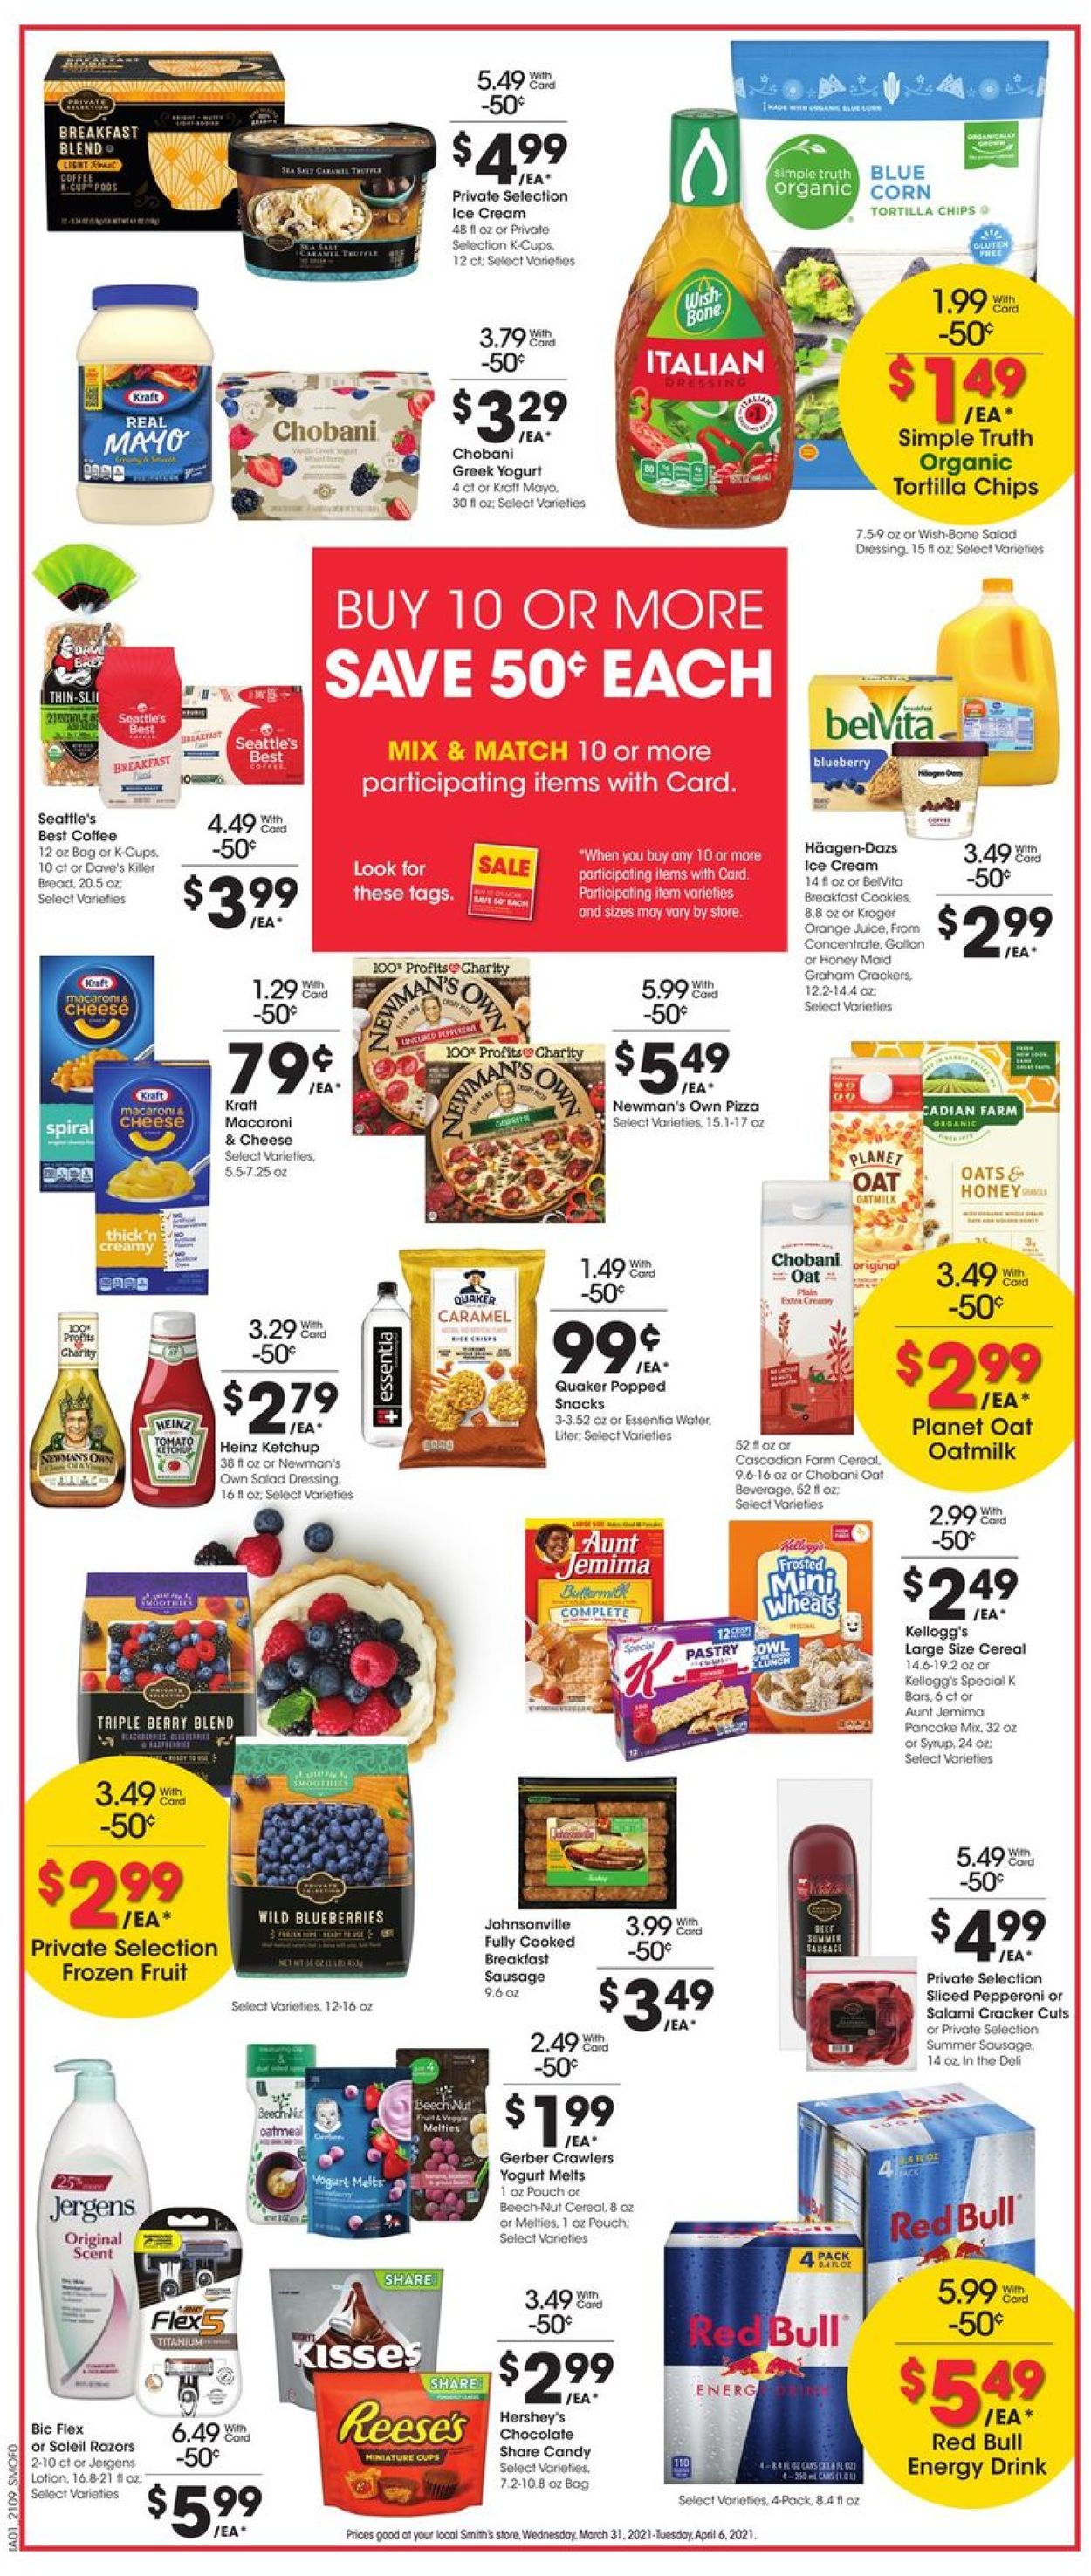 Smith's - Easter 2021 Ad Weekly Ad Circular - valid 03/31-04/06/2021 (Page 4)